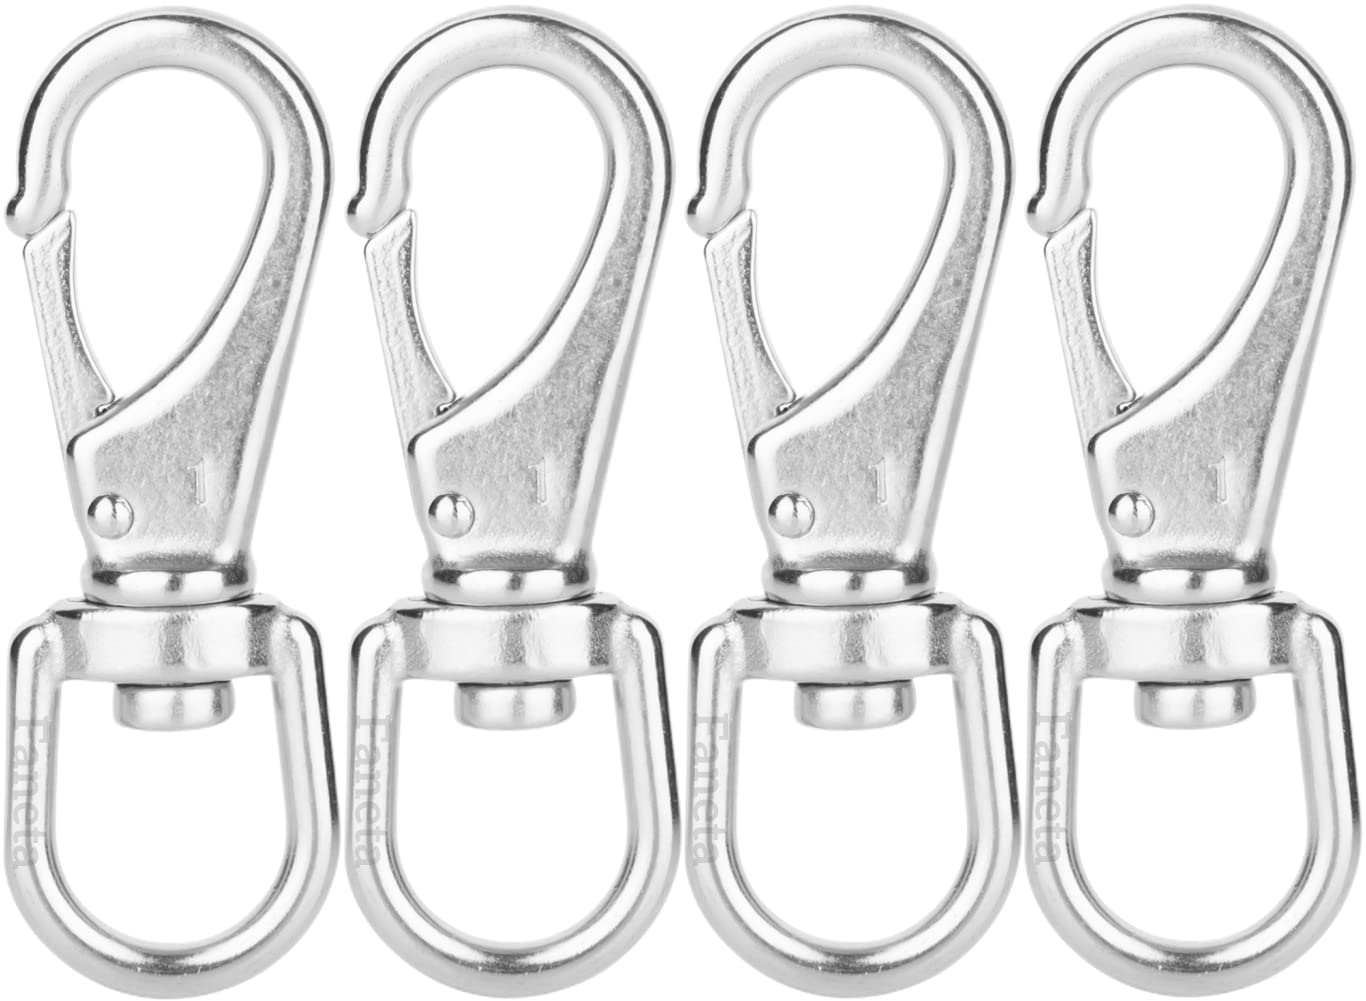 1/2-inch Swivel Snaps for Dog Leashes or Straps: Carabiners, Clips